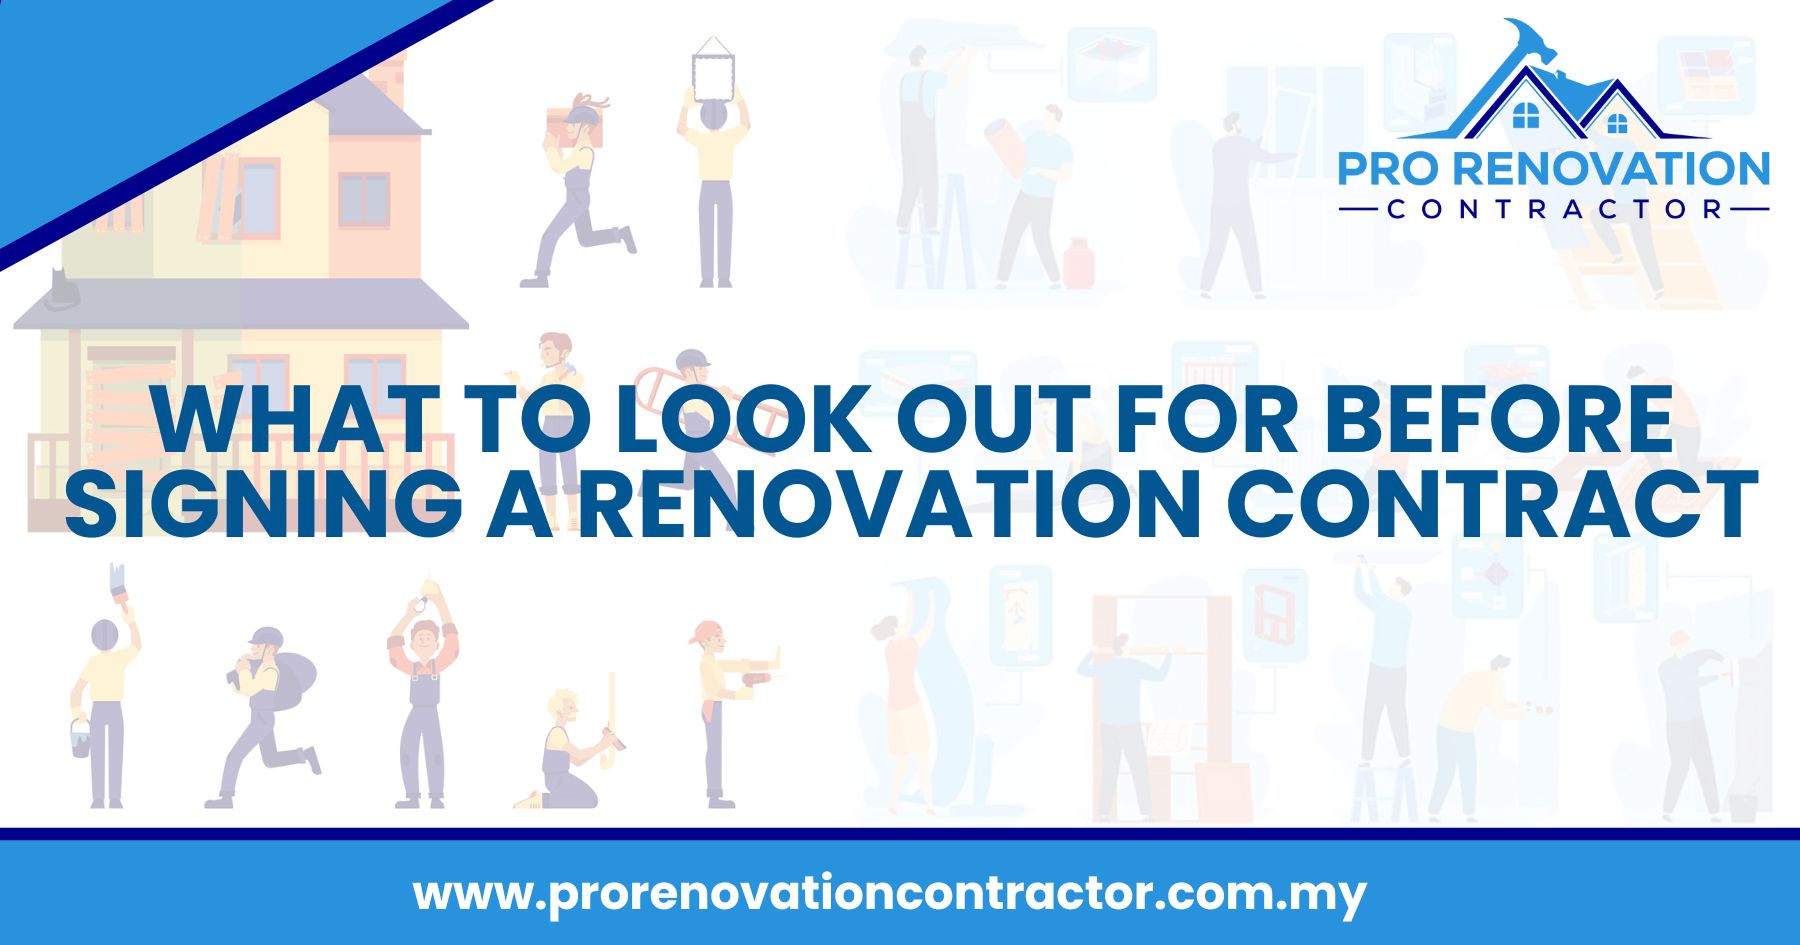 What to Look Out for Before Signing a Renovation Contract